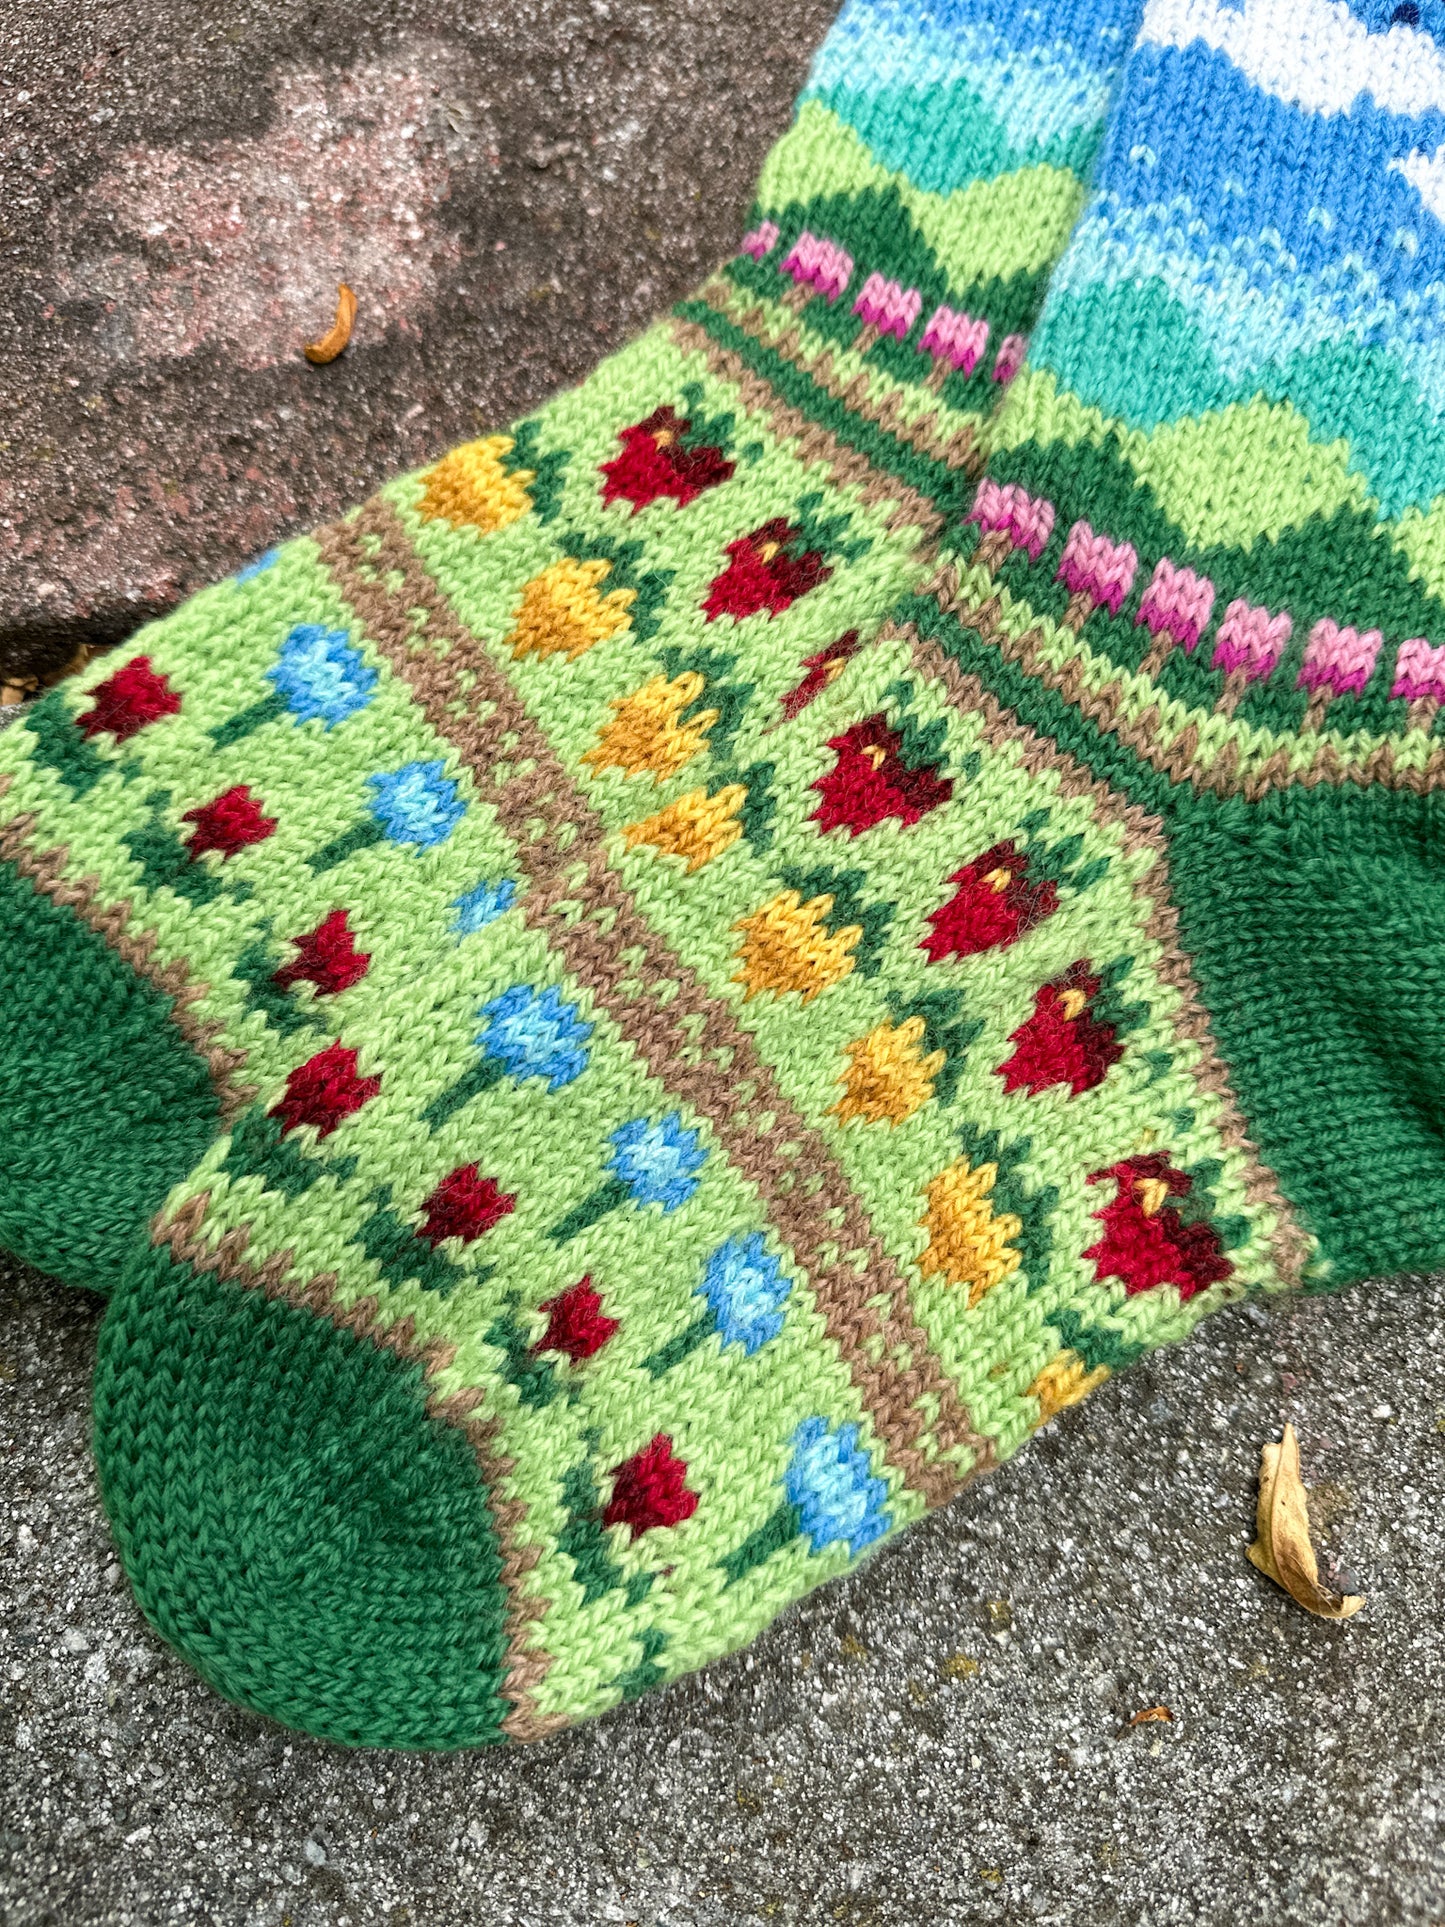 Spring (The Valley Comes Alive) - Digital Knitting Pattern